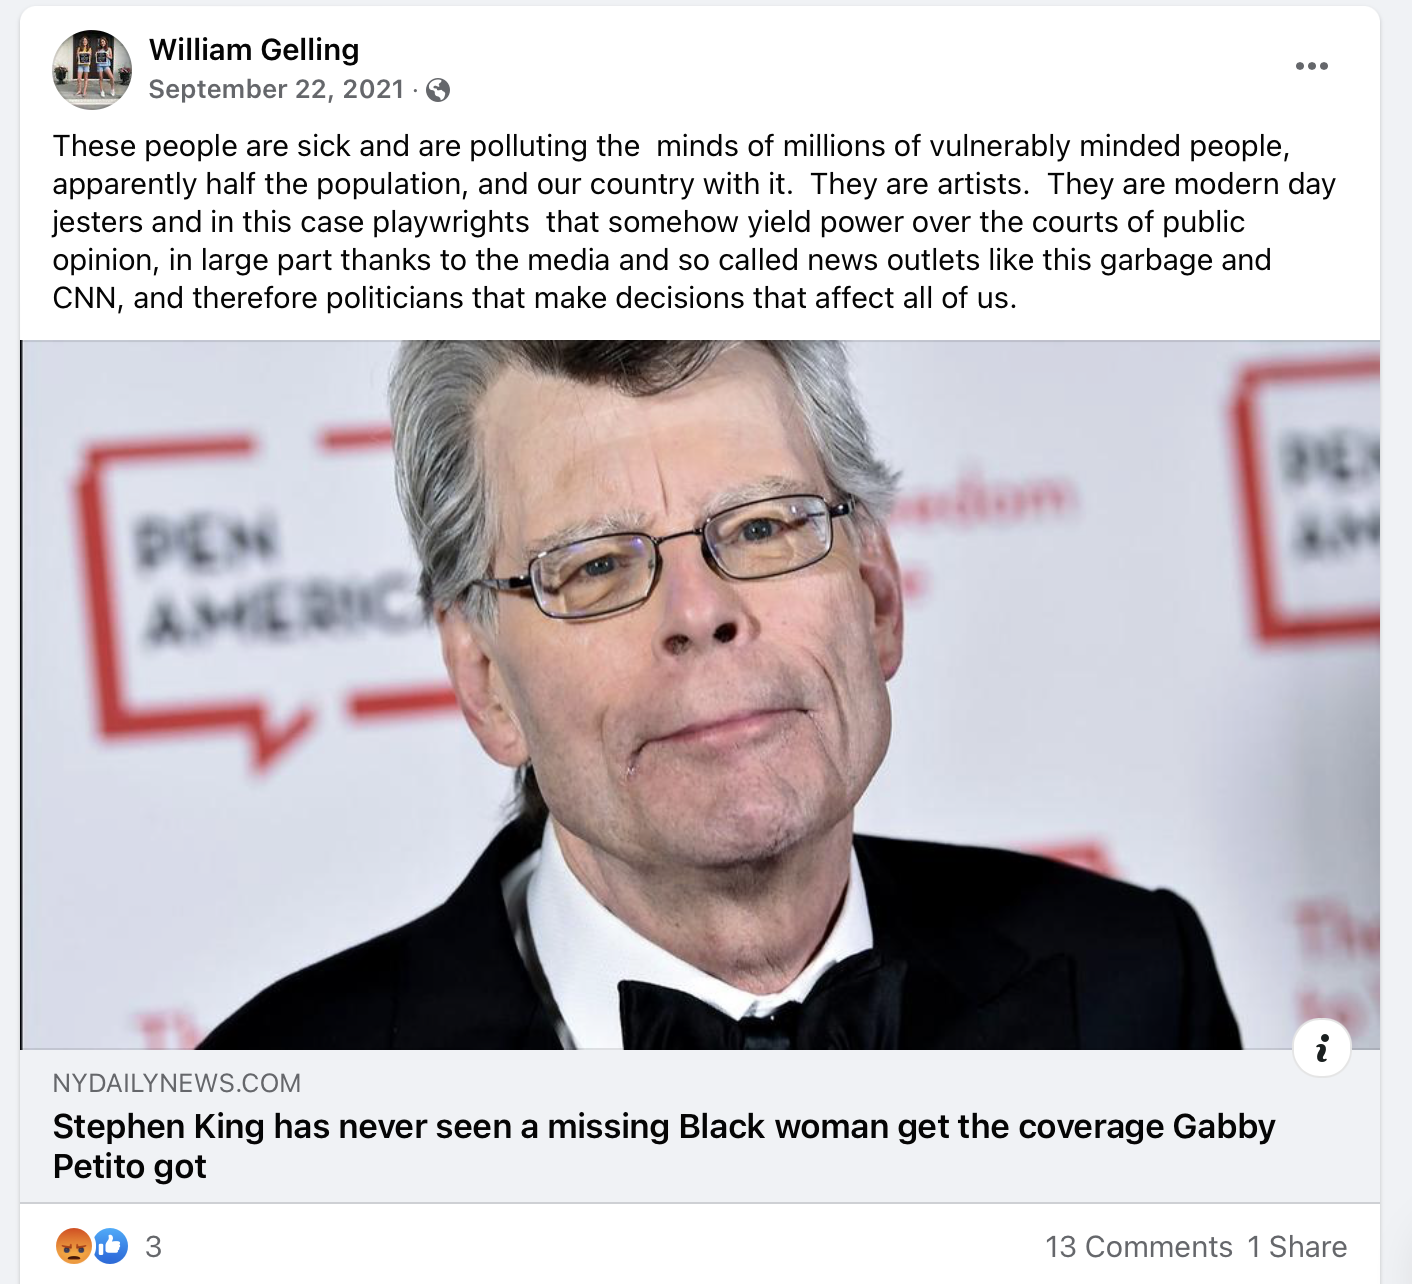 Bill's views on Stephen King against racism 